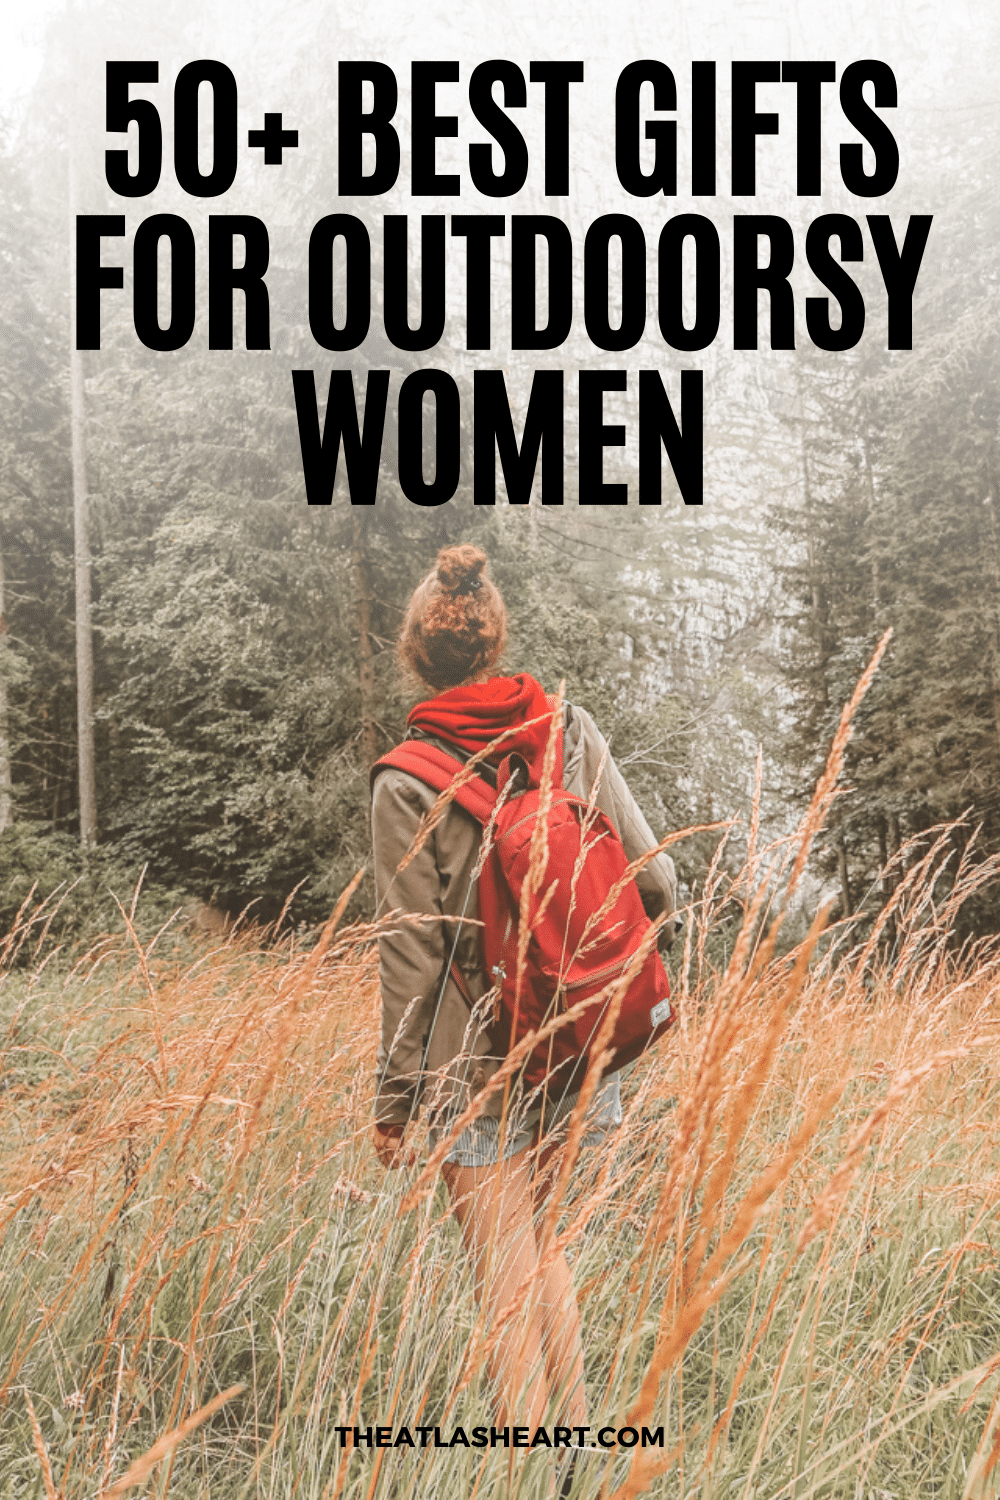 50+ Best Gifts for Outdoorsy Women (That They’ll Actually Want)